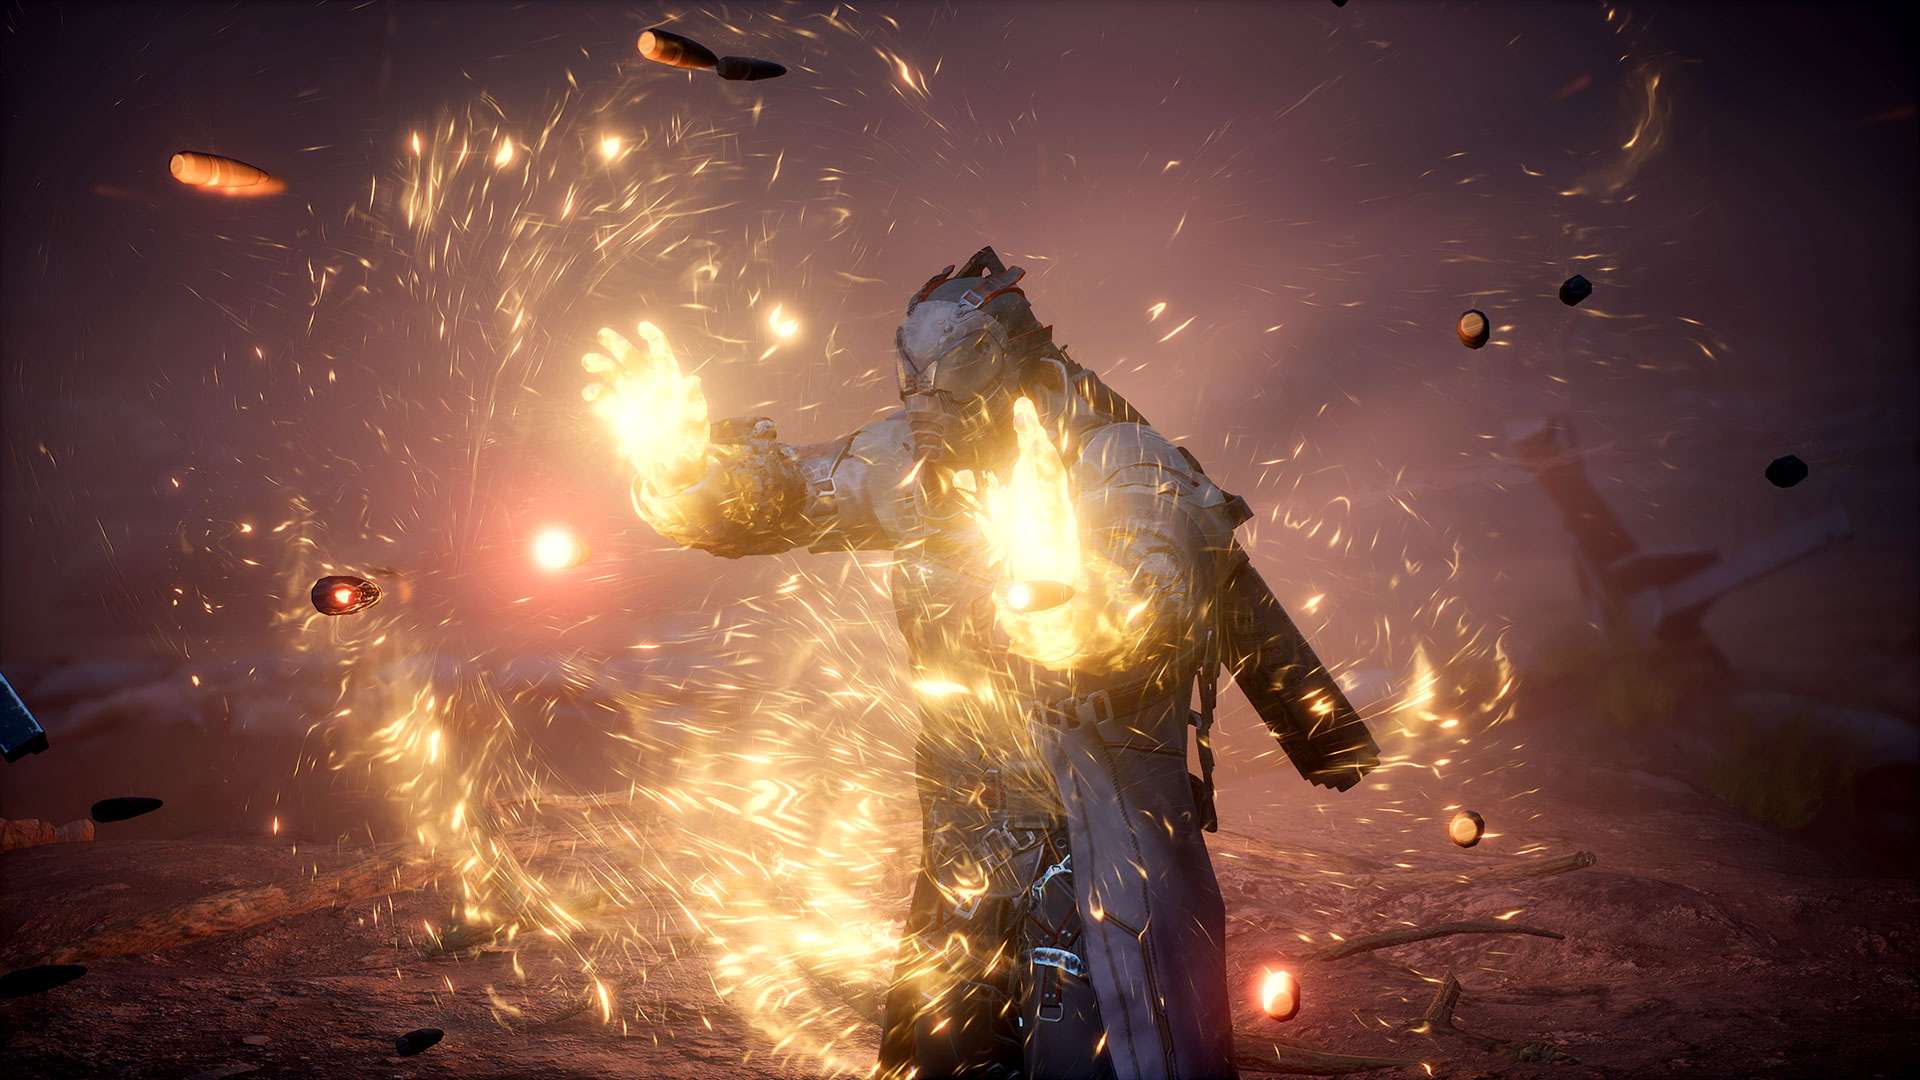 The Devastator can summon a bullet-reflecting shield. (Screenshot: People Can Fly / Square Enix)